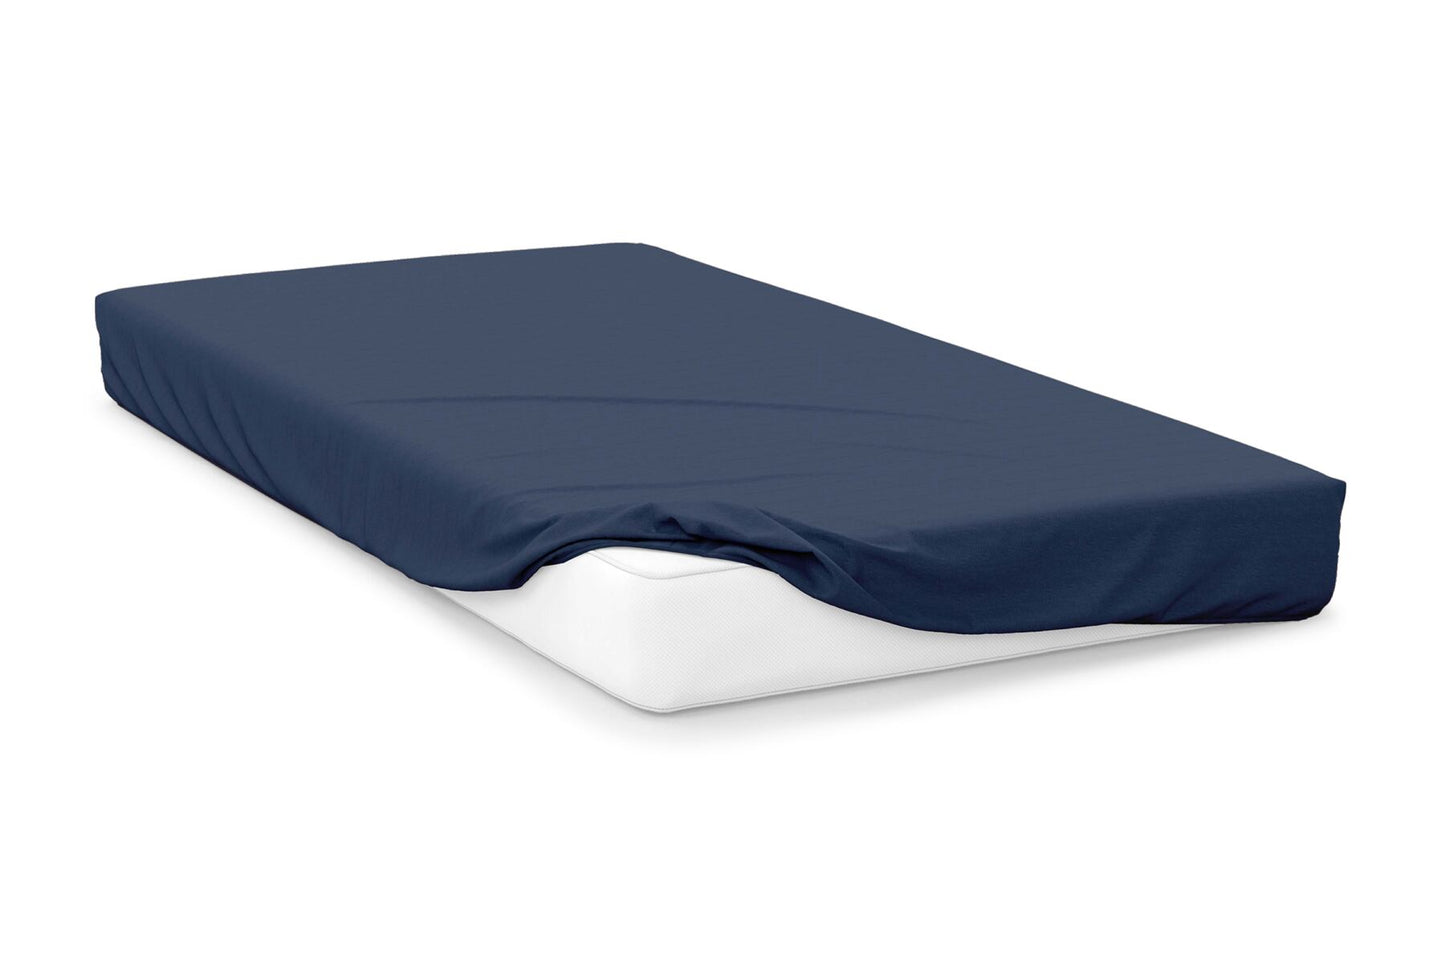 Belledorm-Fitted Sheets-Luxury Percale-200 Thread Count-Navy